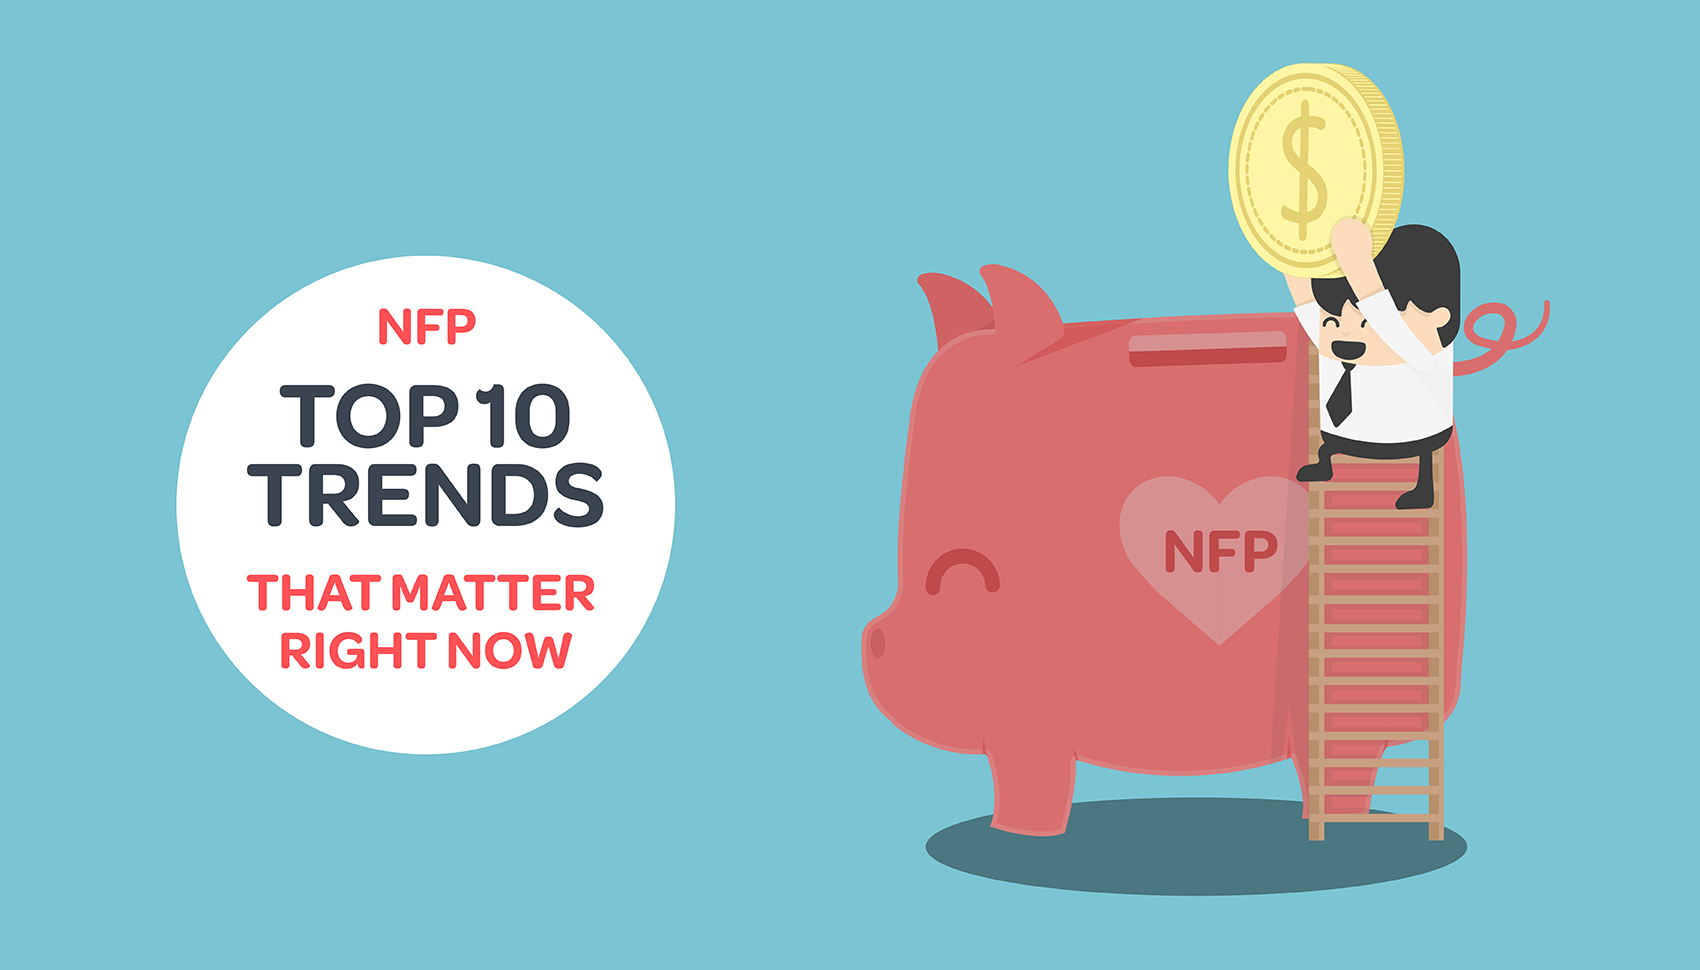 Top 10 NFP trends that matter right now